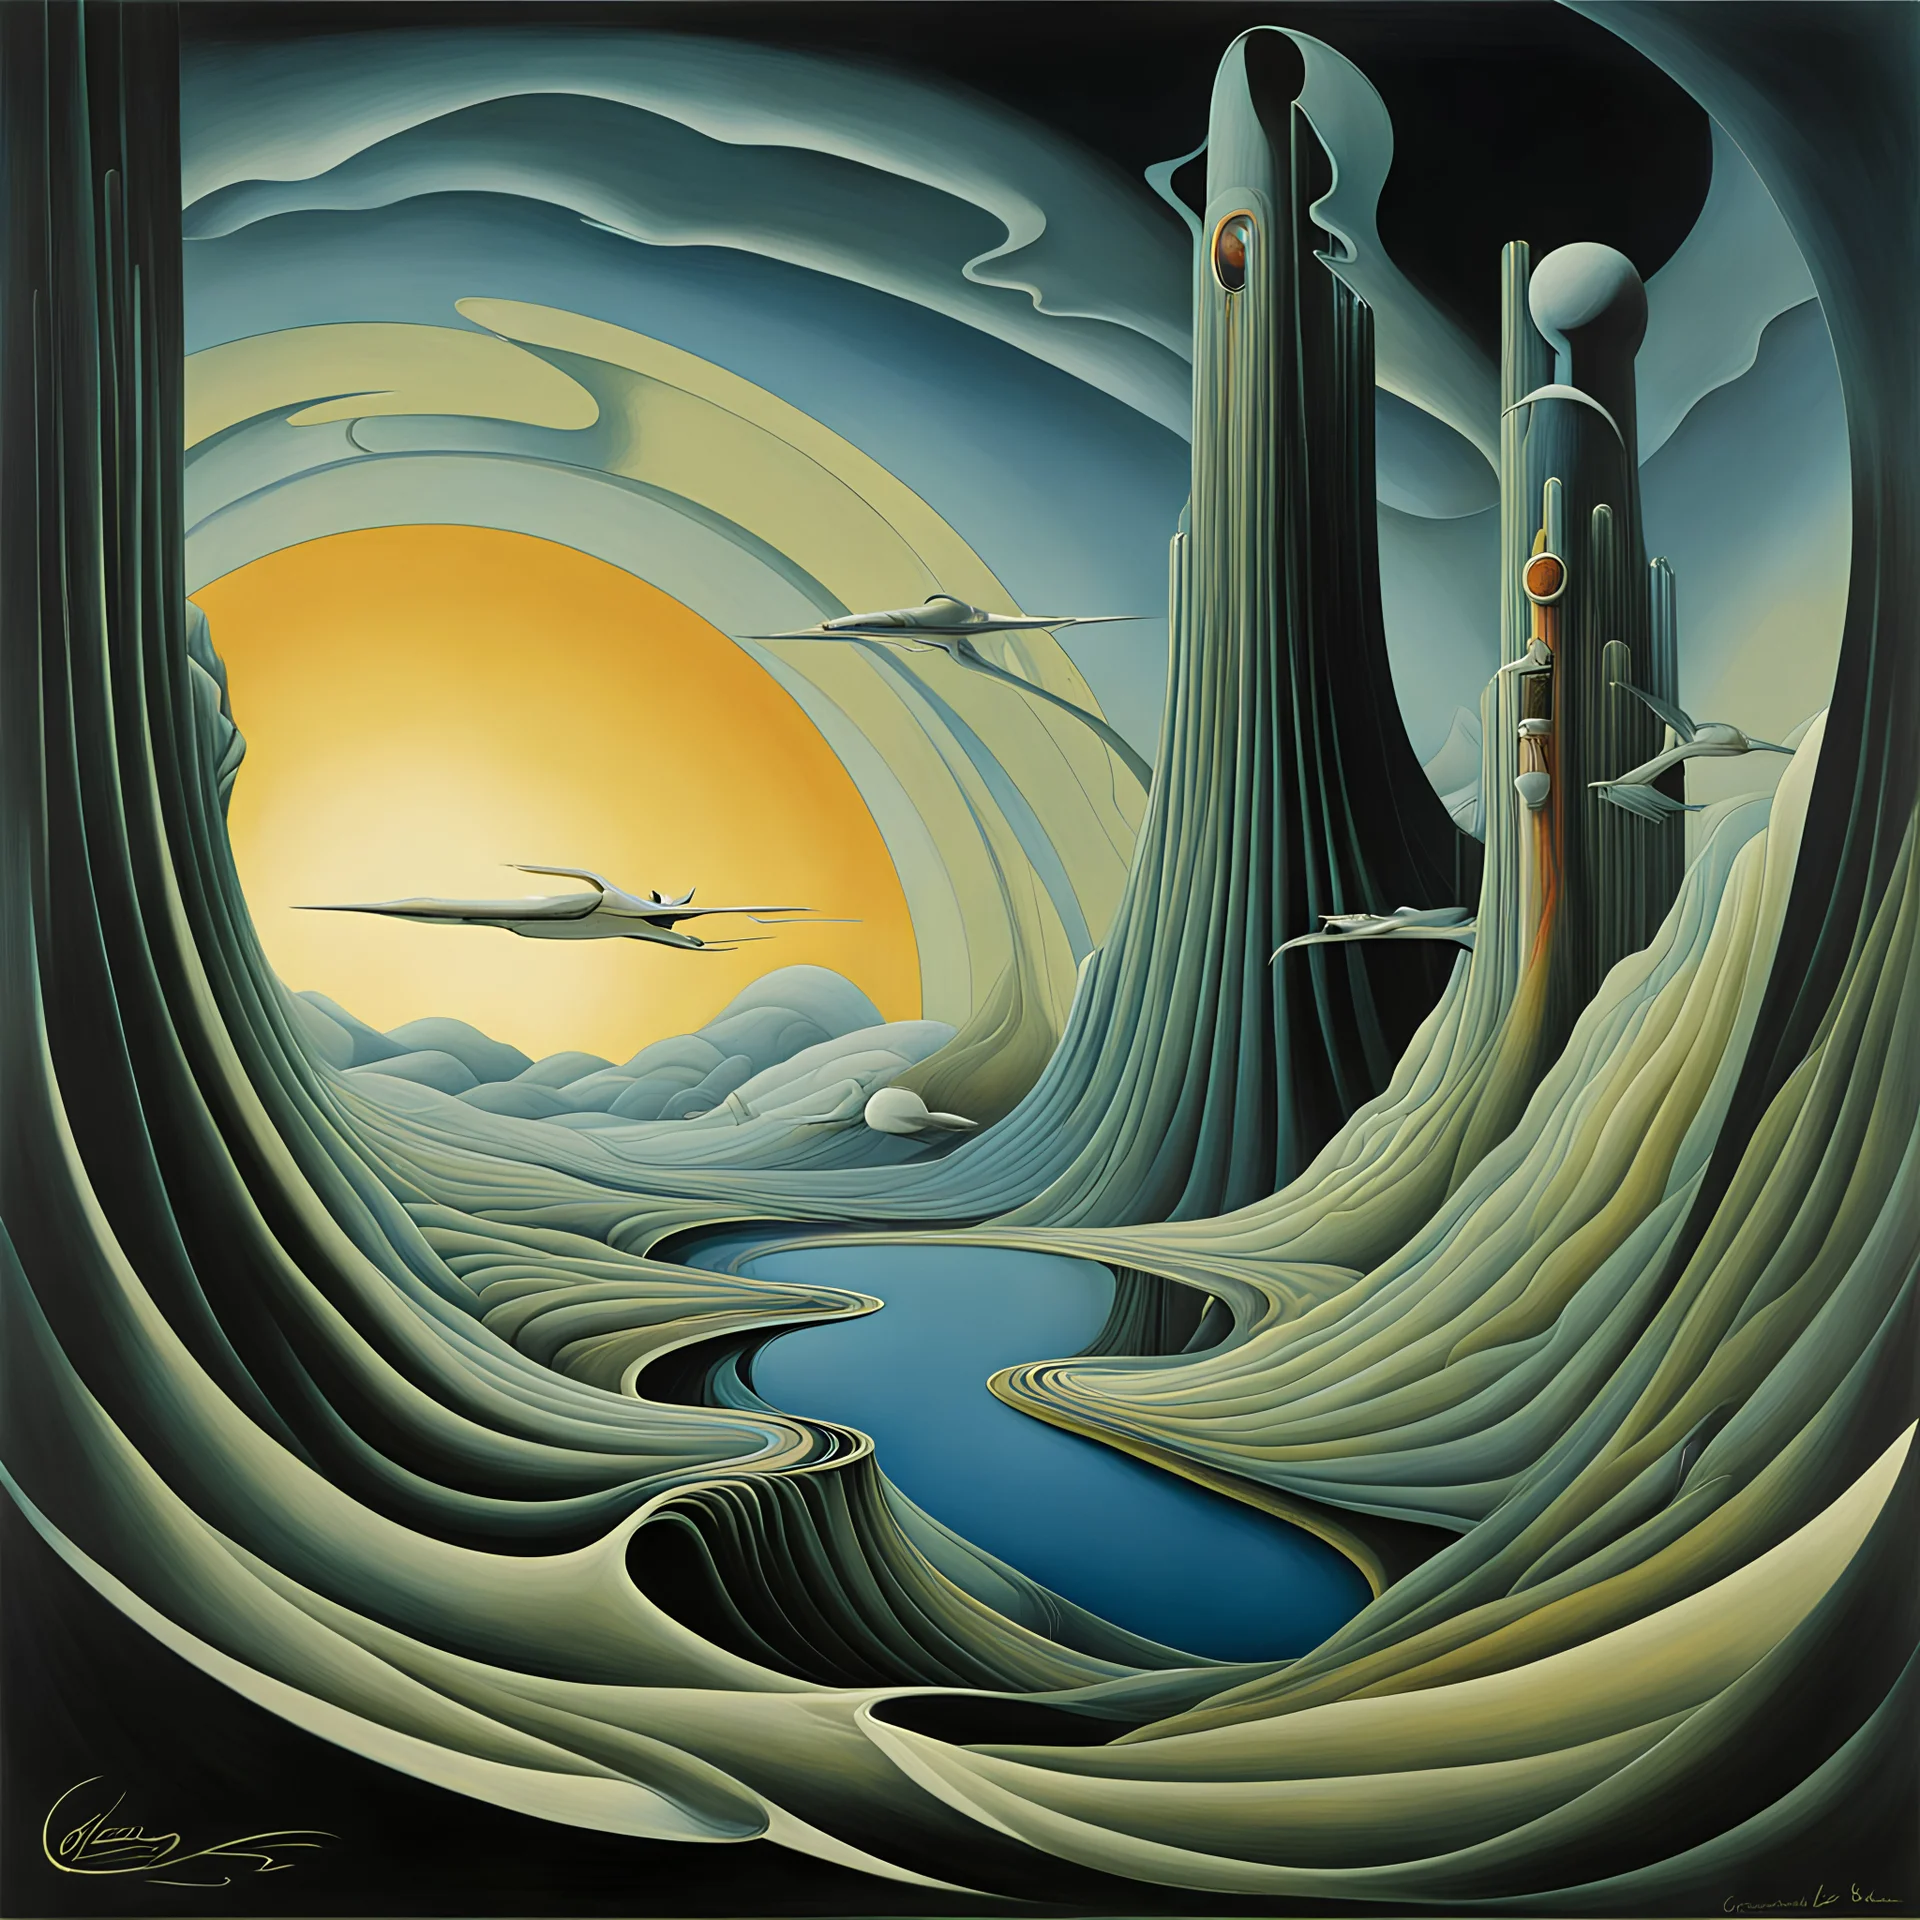 A Dream within a Dream, hope has flown away amid the pitiless roar, expansive, sinister, dark vibrant colors, asymmetric surrealism. by Gerald Scarfe, by Kay Sage, smooth matte oil painting, meander, weirdcore.